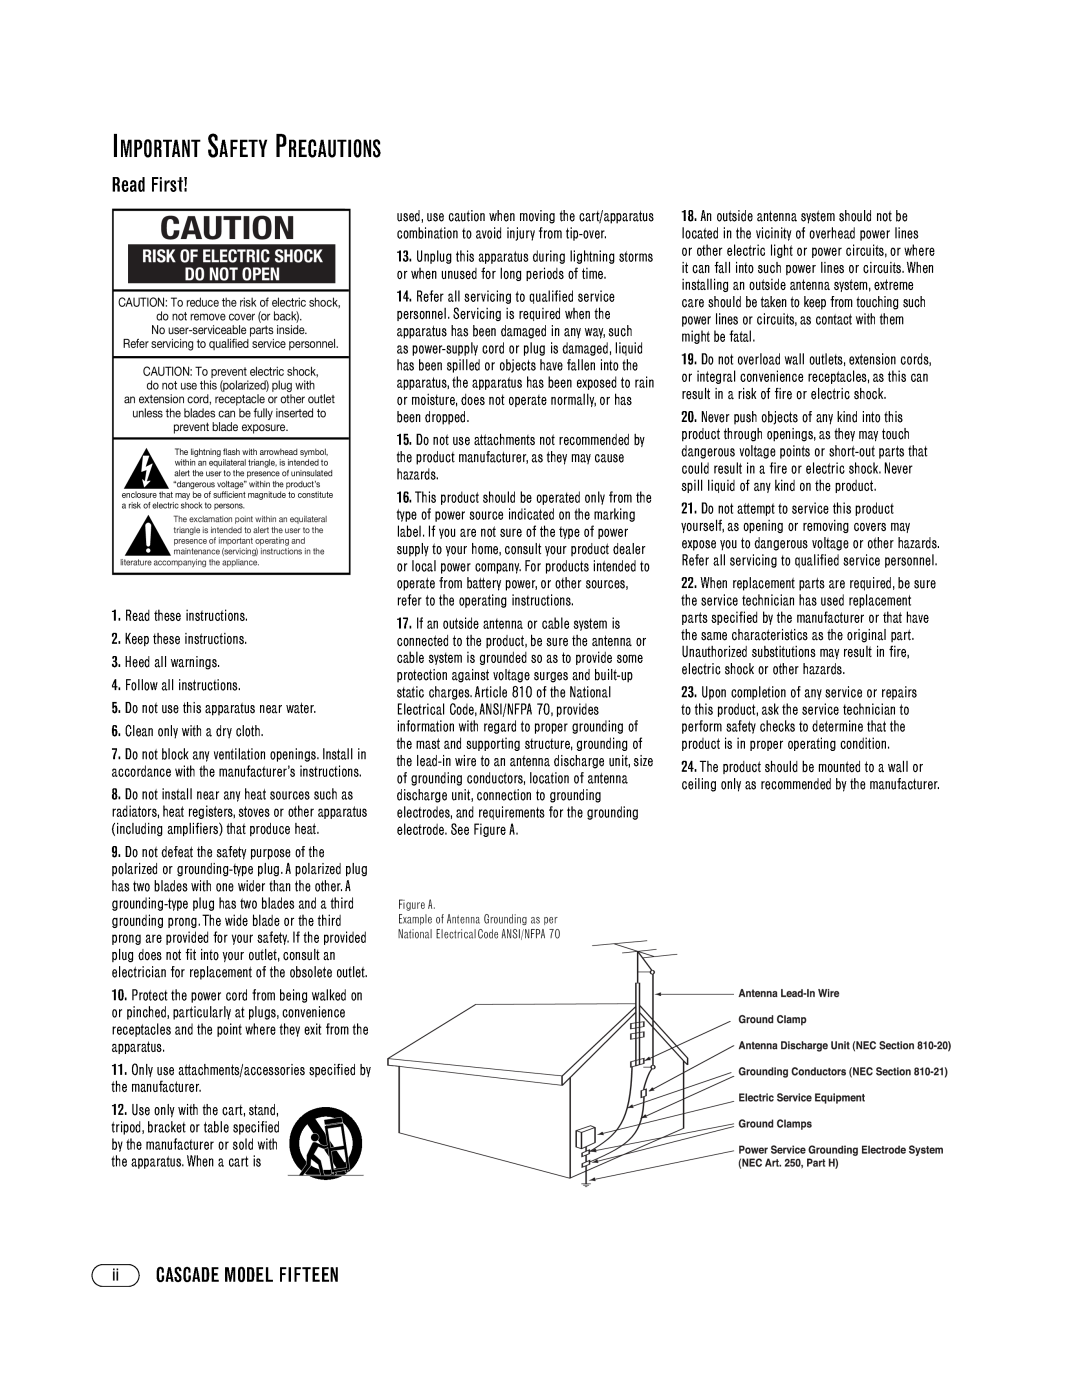 Infinity manual Read First, iiCASCADE MODEL FIFTEEN, Important Safety Precautions, Read these instructions 